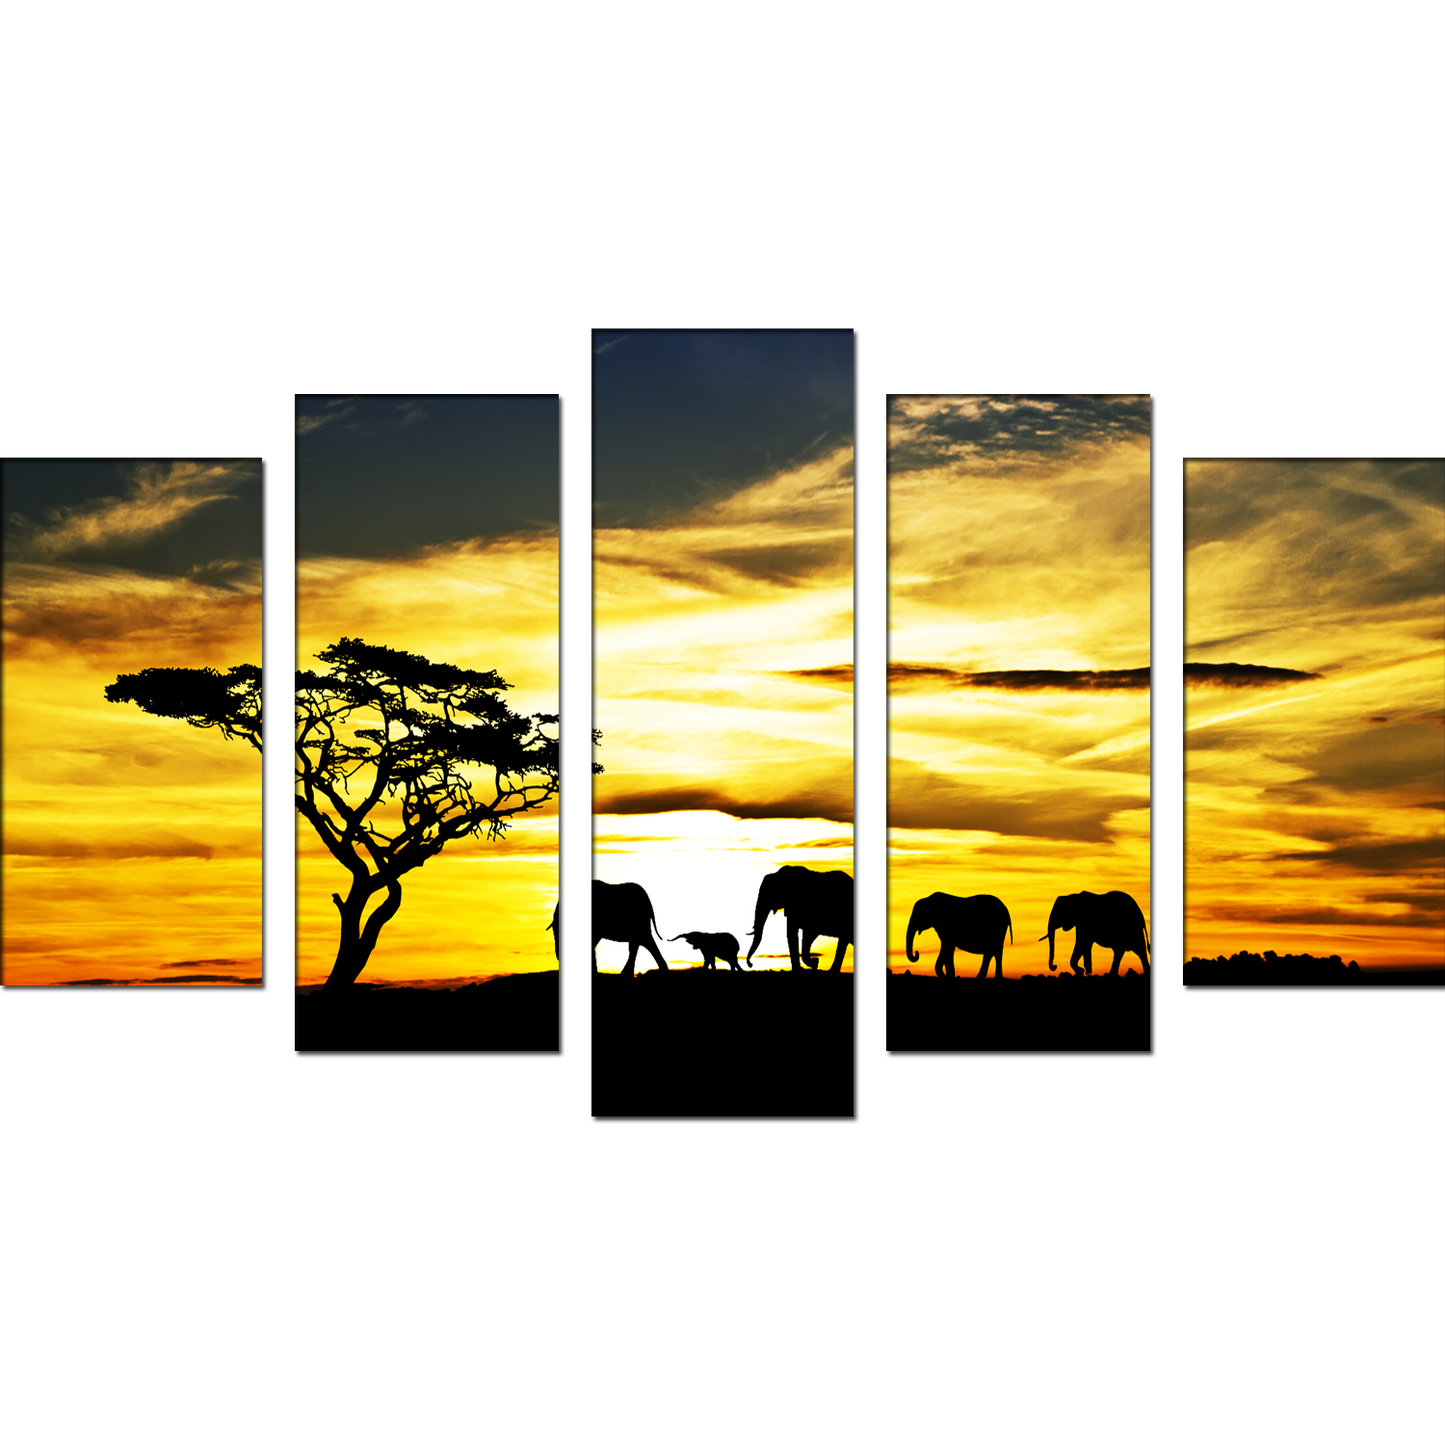 Beautiful View Of Elephants in Sunset MDF Panel Painting